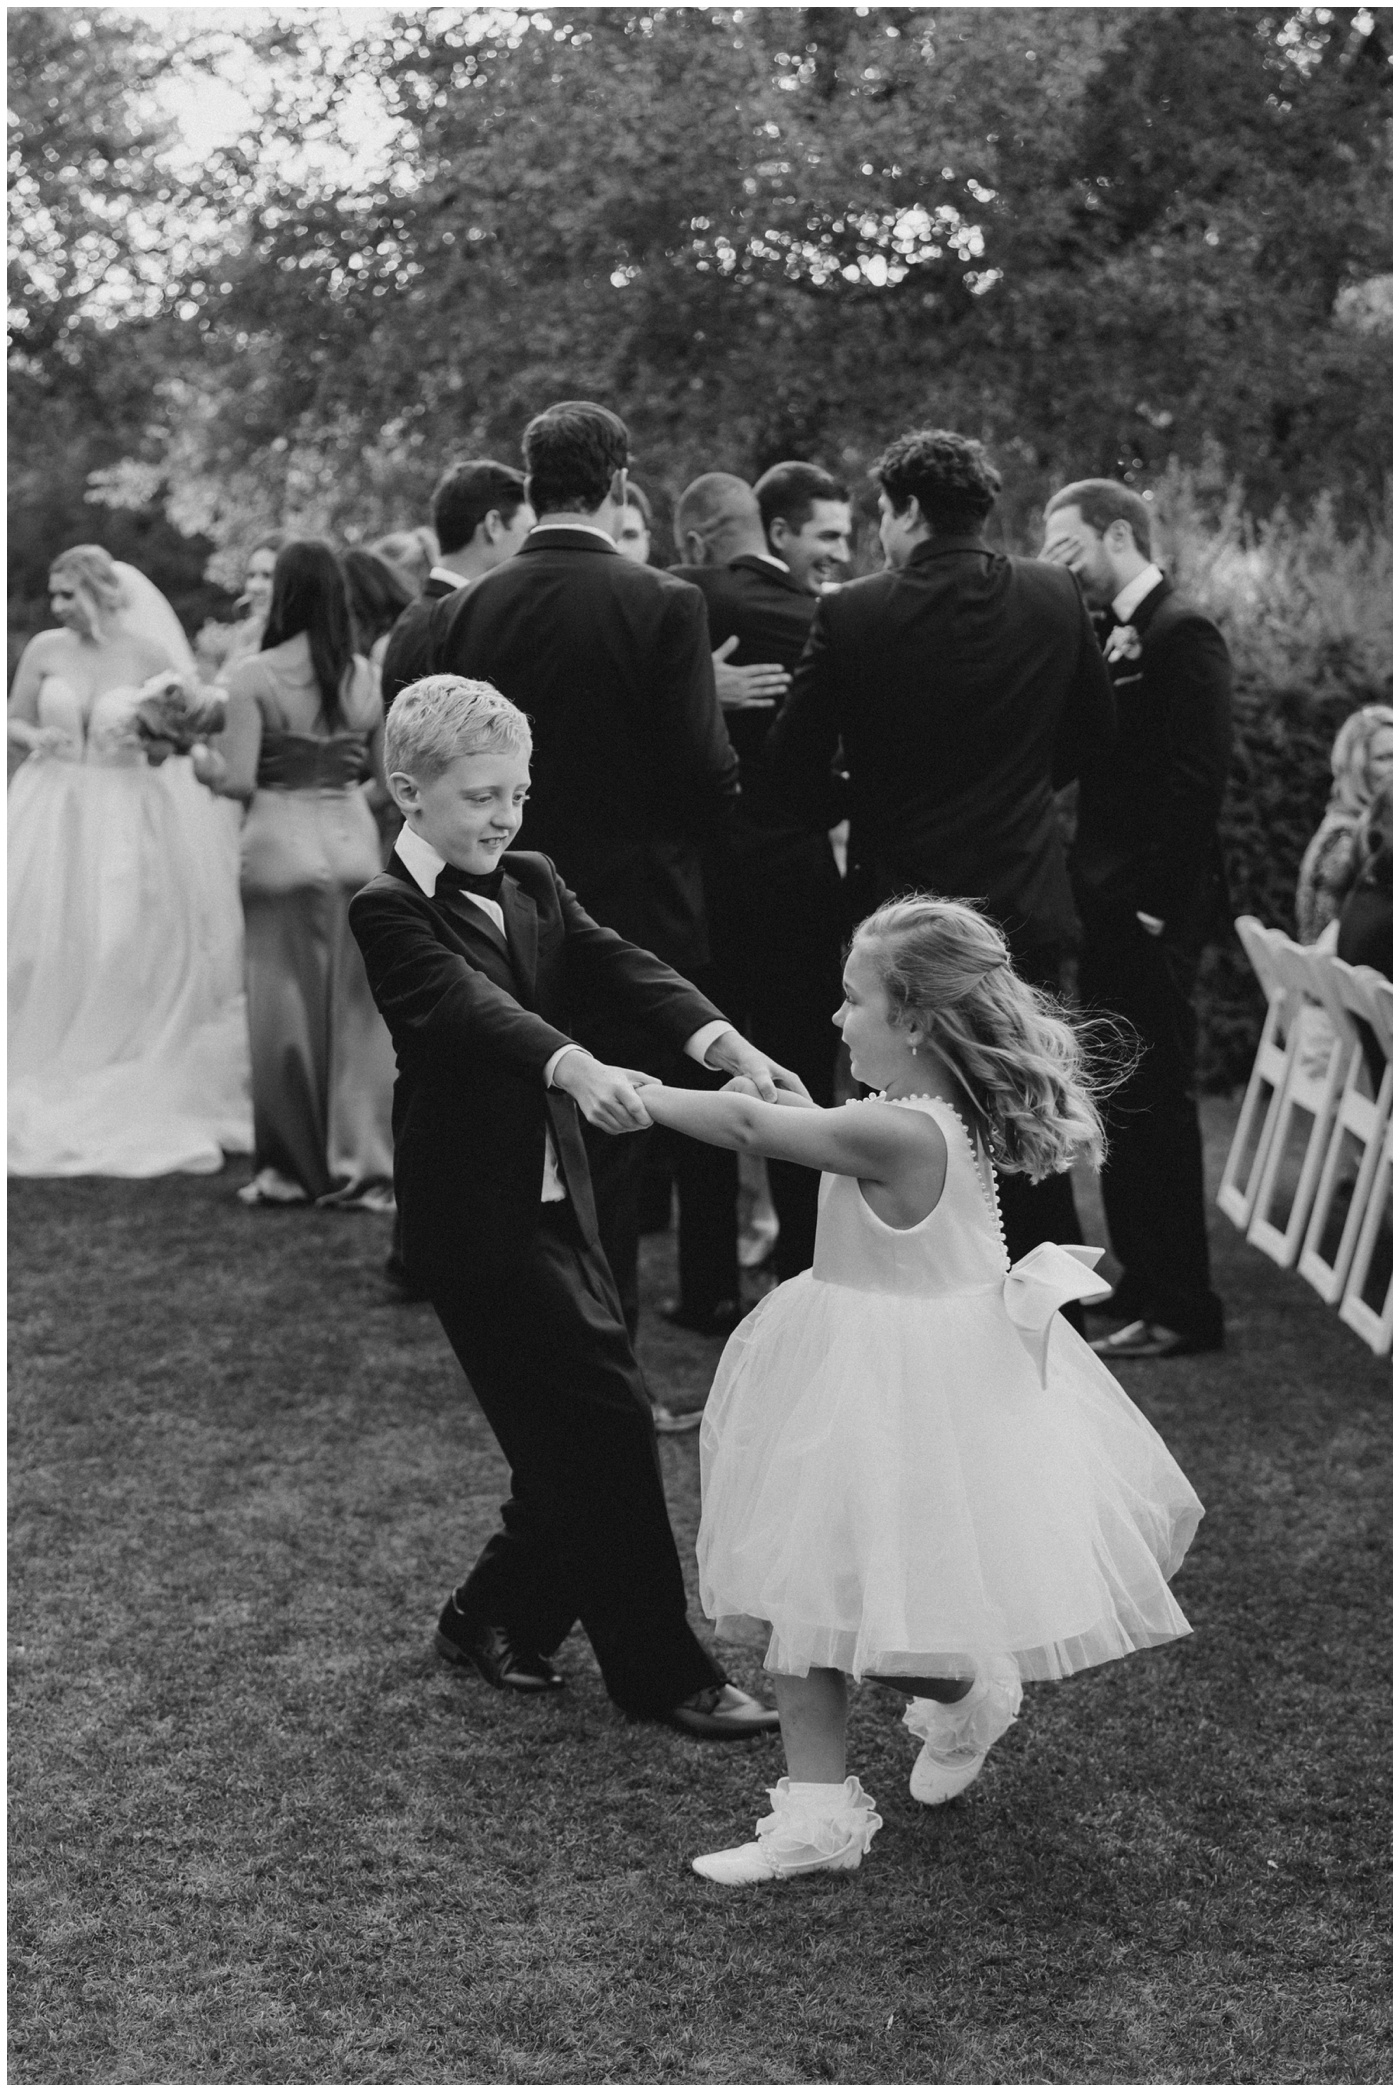 The flower girl and ring bearer dance together after the wedding ceremony